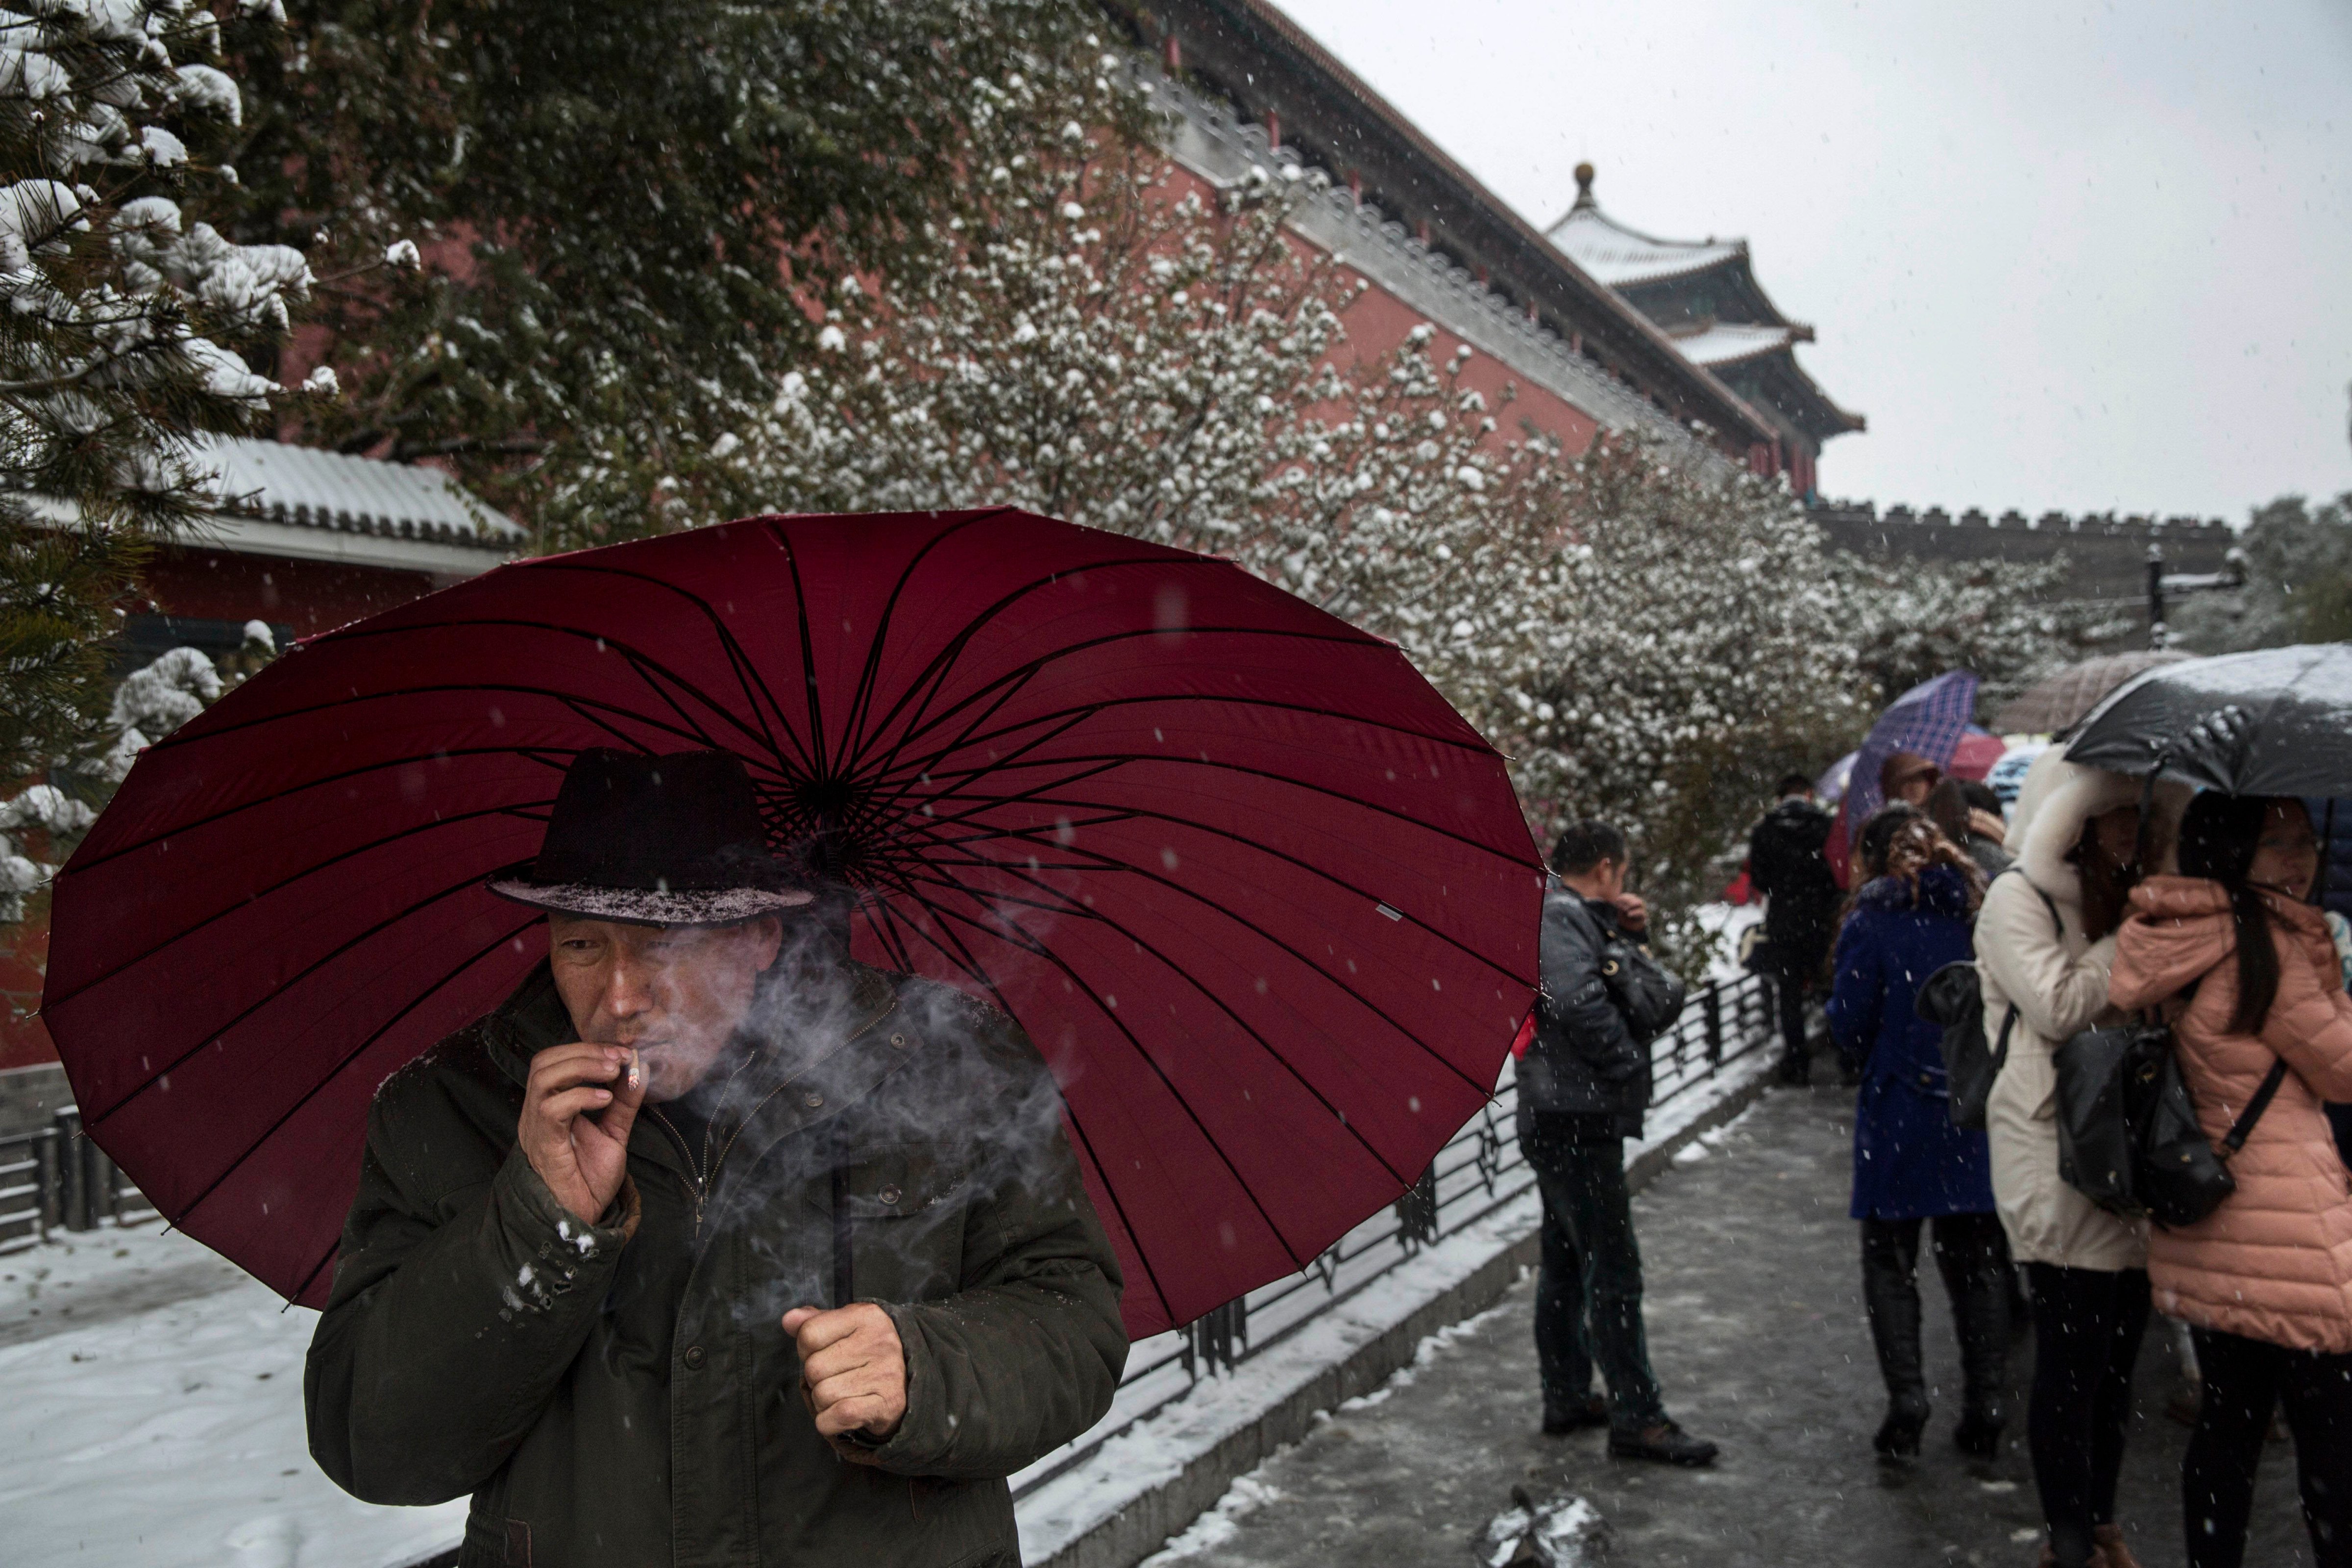 A Chinese man smokes as he shields himself under an umbrella from the snow during a snowfall on November 22, 2014 outside the Forbidden City in Beijing, China. (Kevin Frayer—Getty Images)